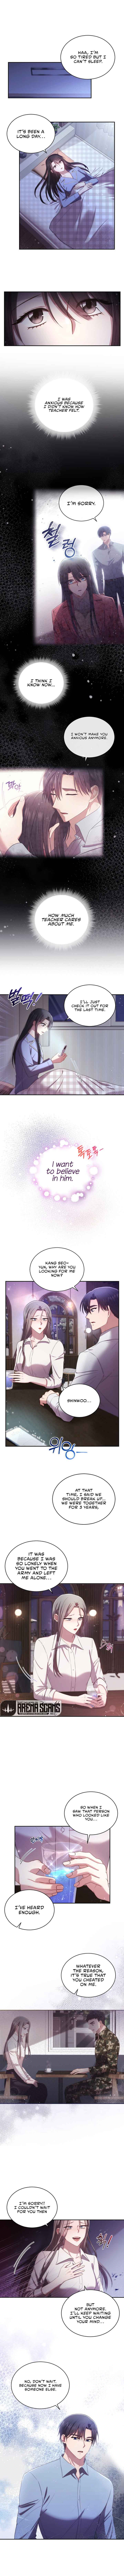 Between Disciple and Lover - Chapter 21 - Coffee Manga